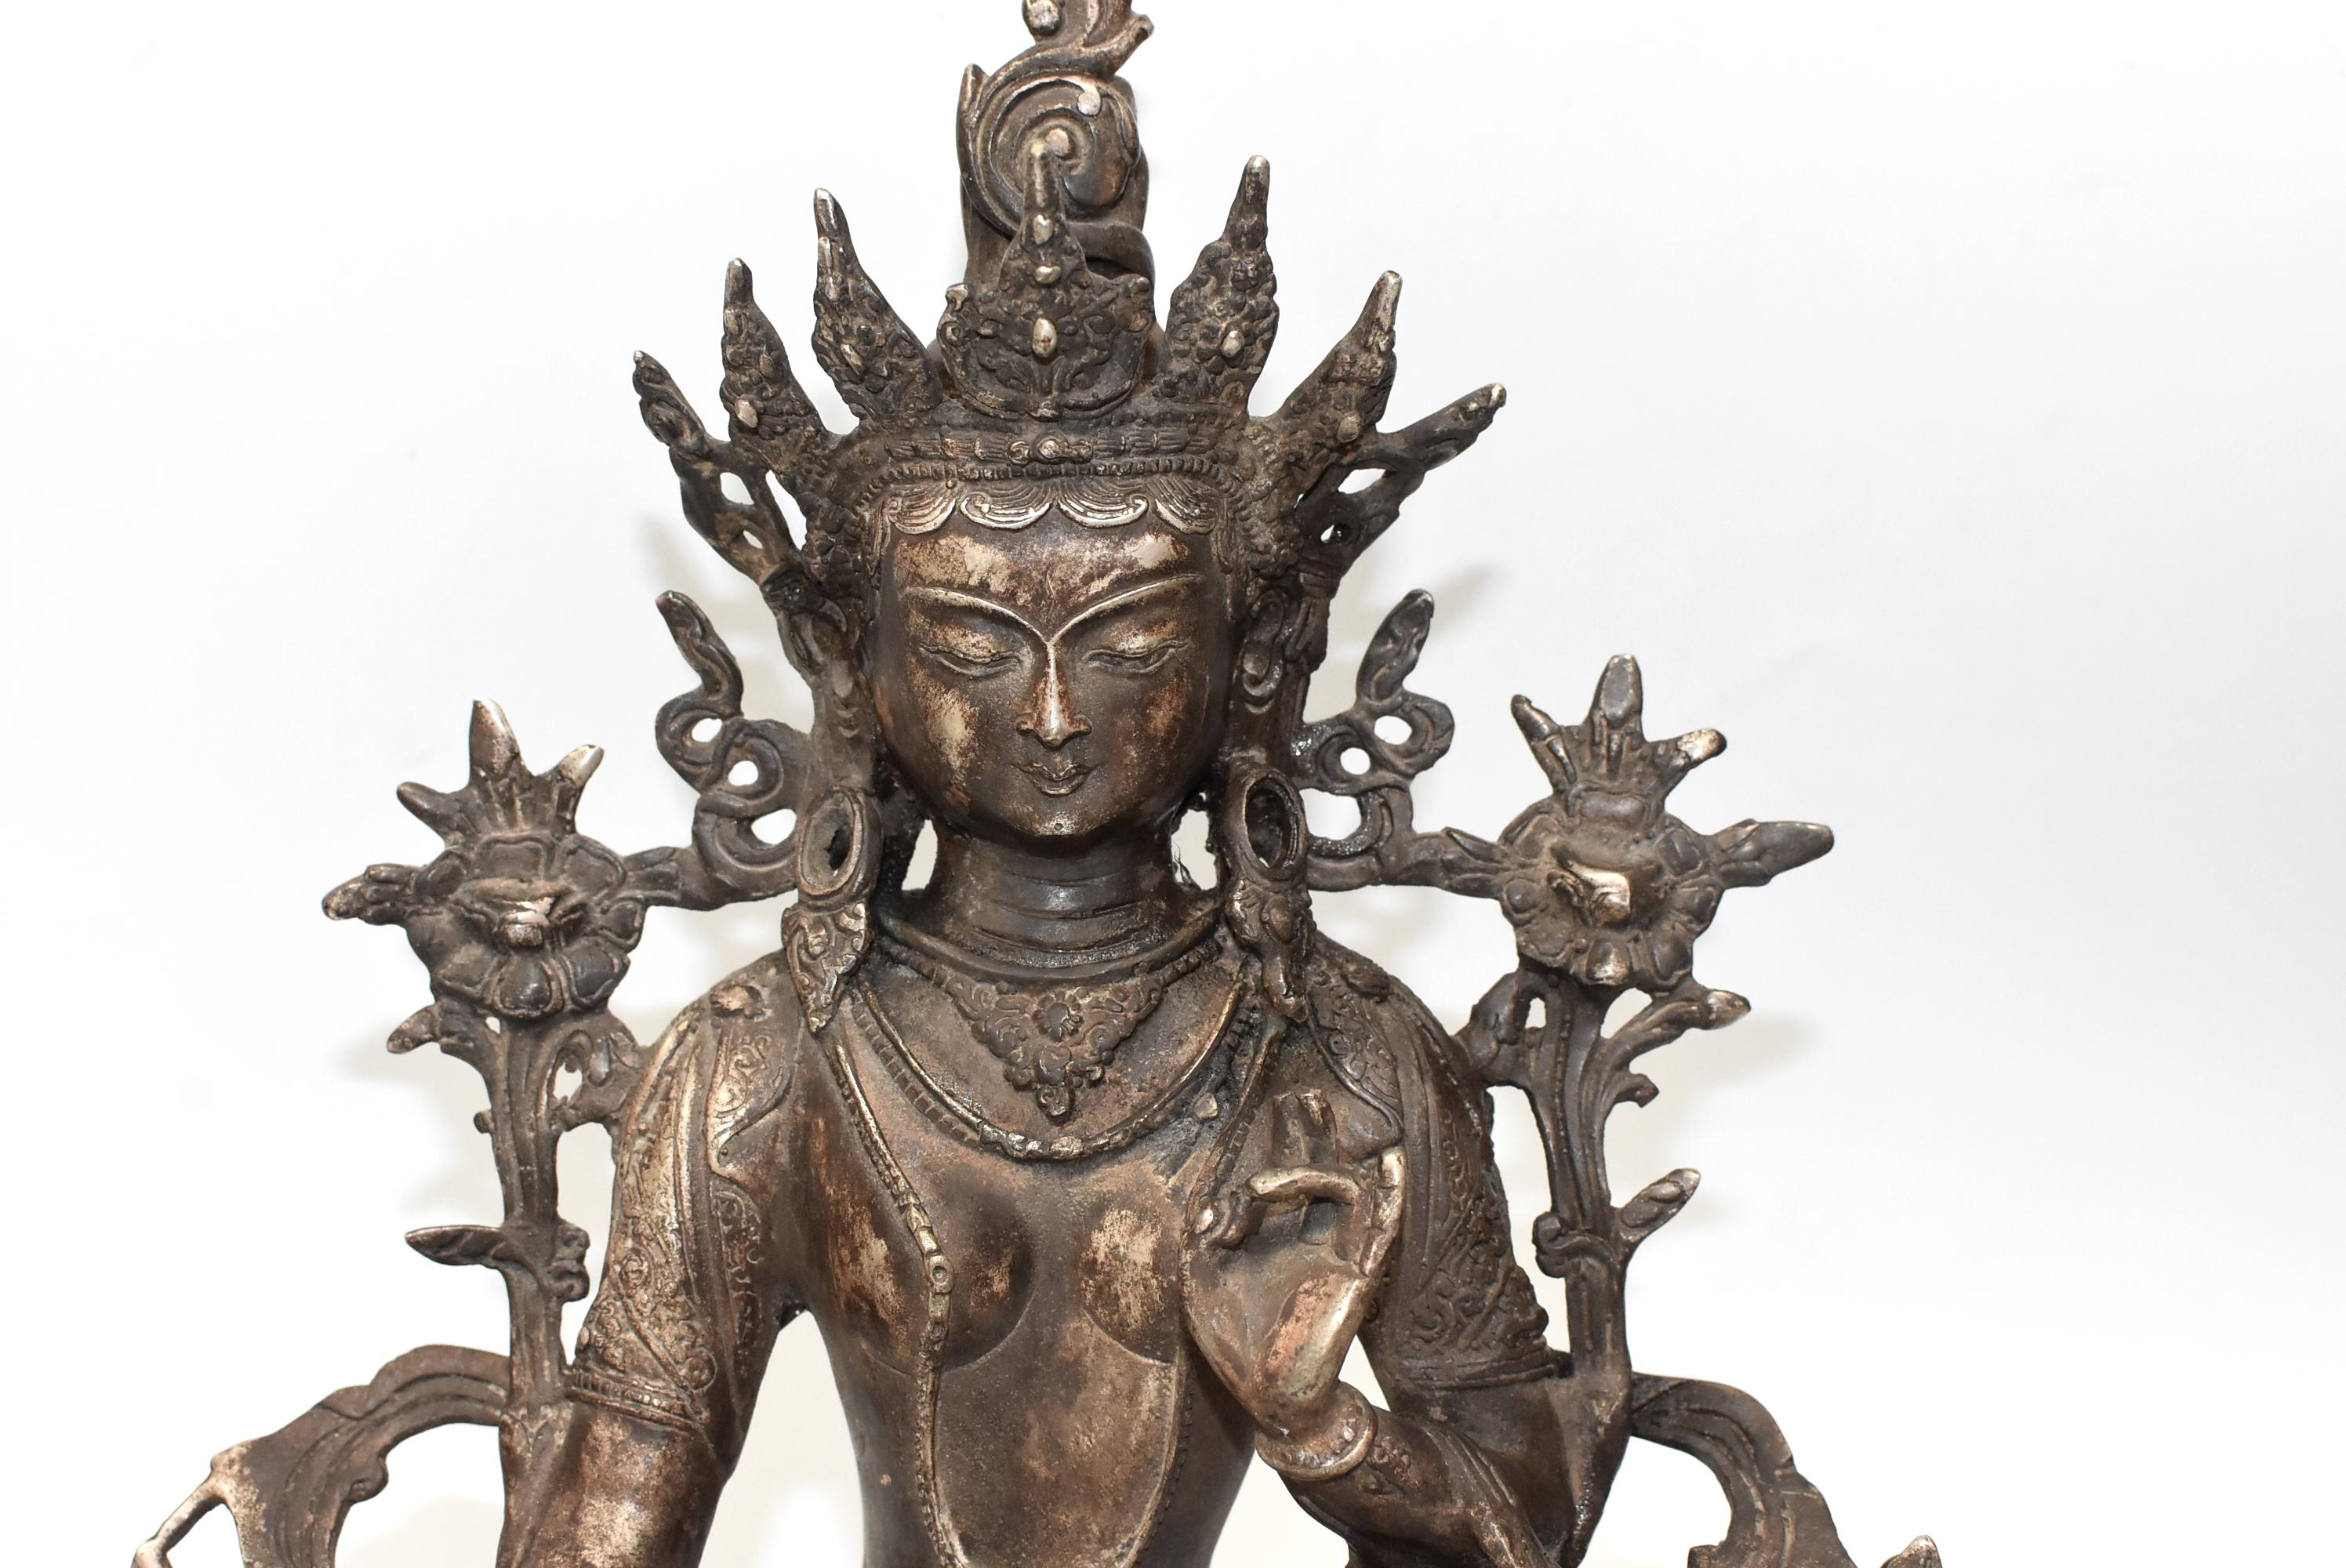 A beautiful, large antique Tibetan Tara statue. The white Tara is seated on a large lotus throne. She wears a highly decorated crown and a fluid robe embossed with flowers and scrolls, her body is draped with lariats of pearls. Fine facial features